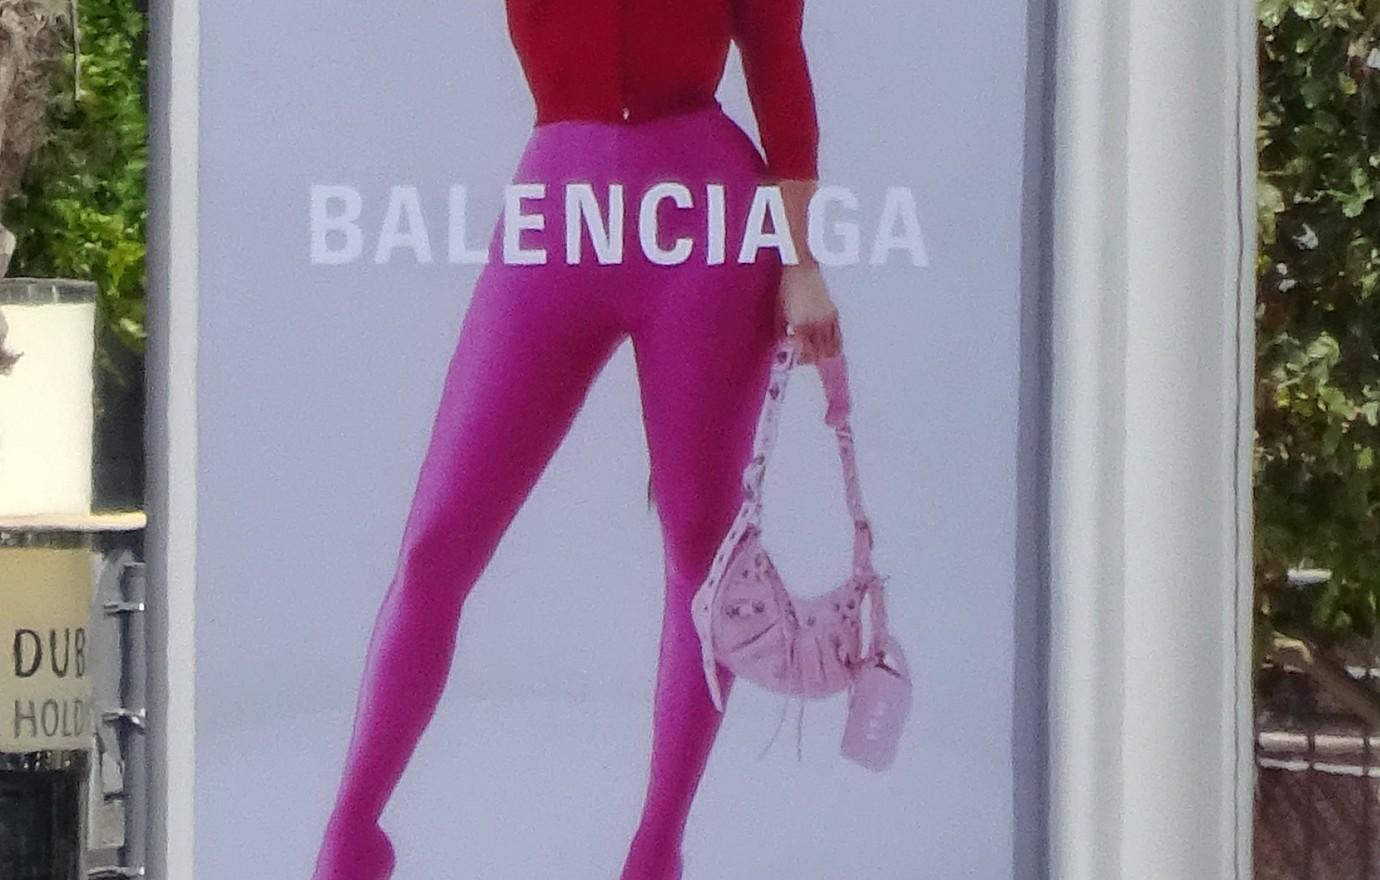 Balenciaga seeks $25 million in damages for the controversial ad